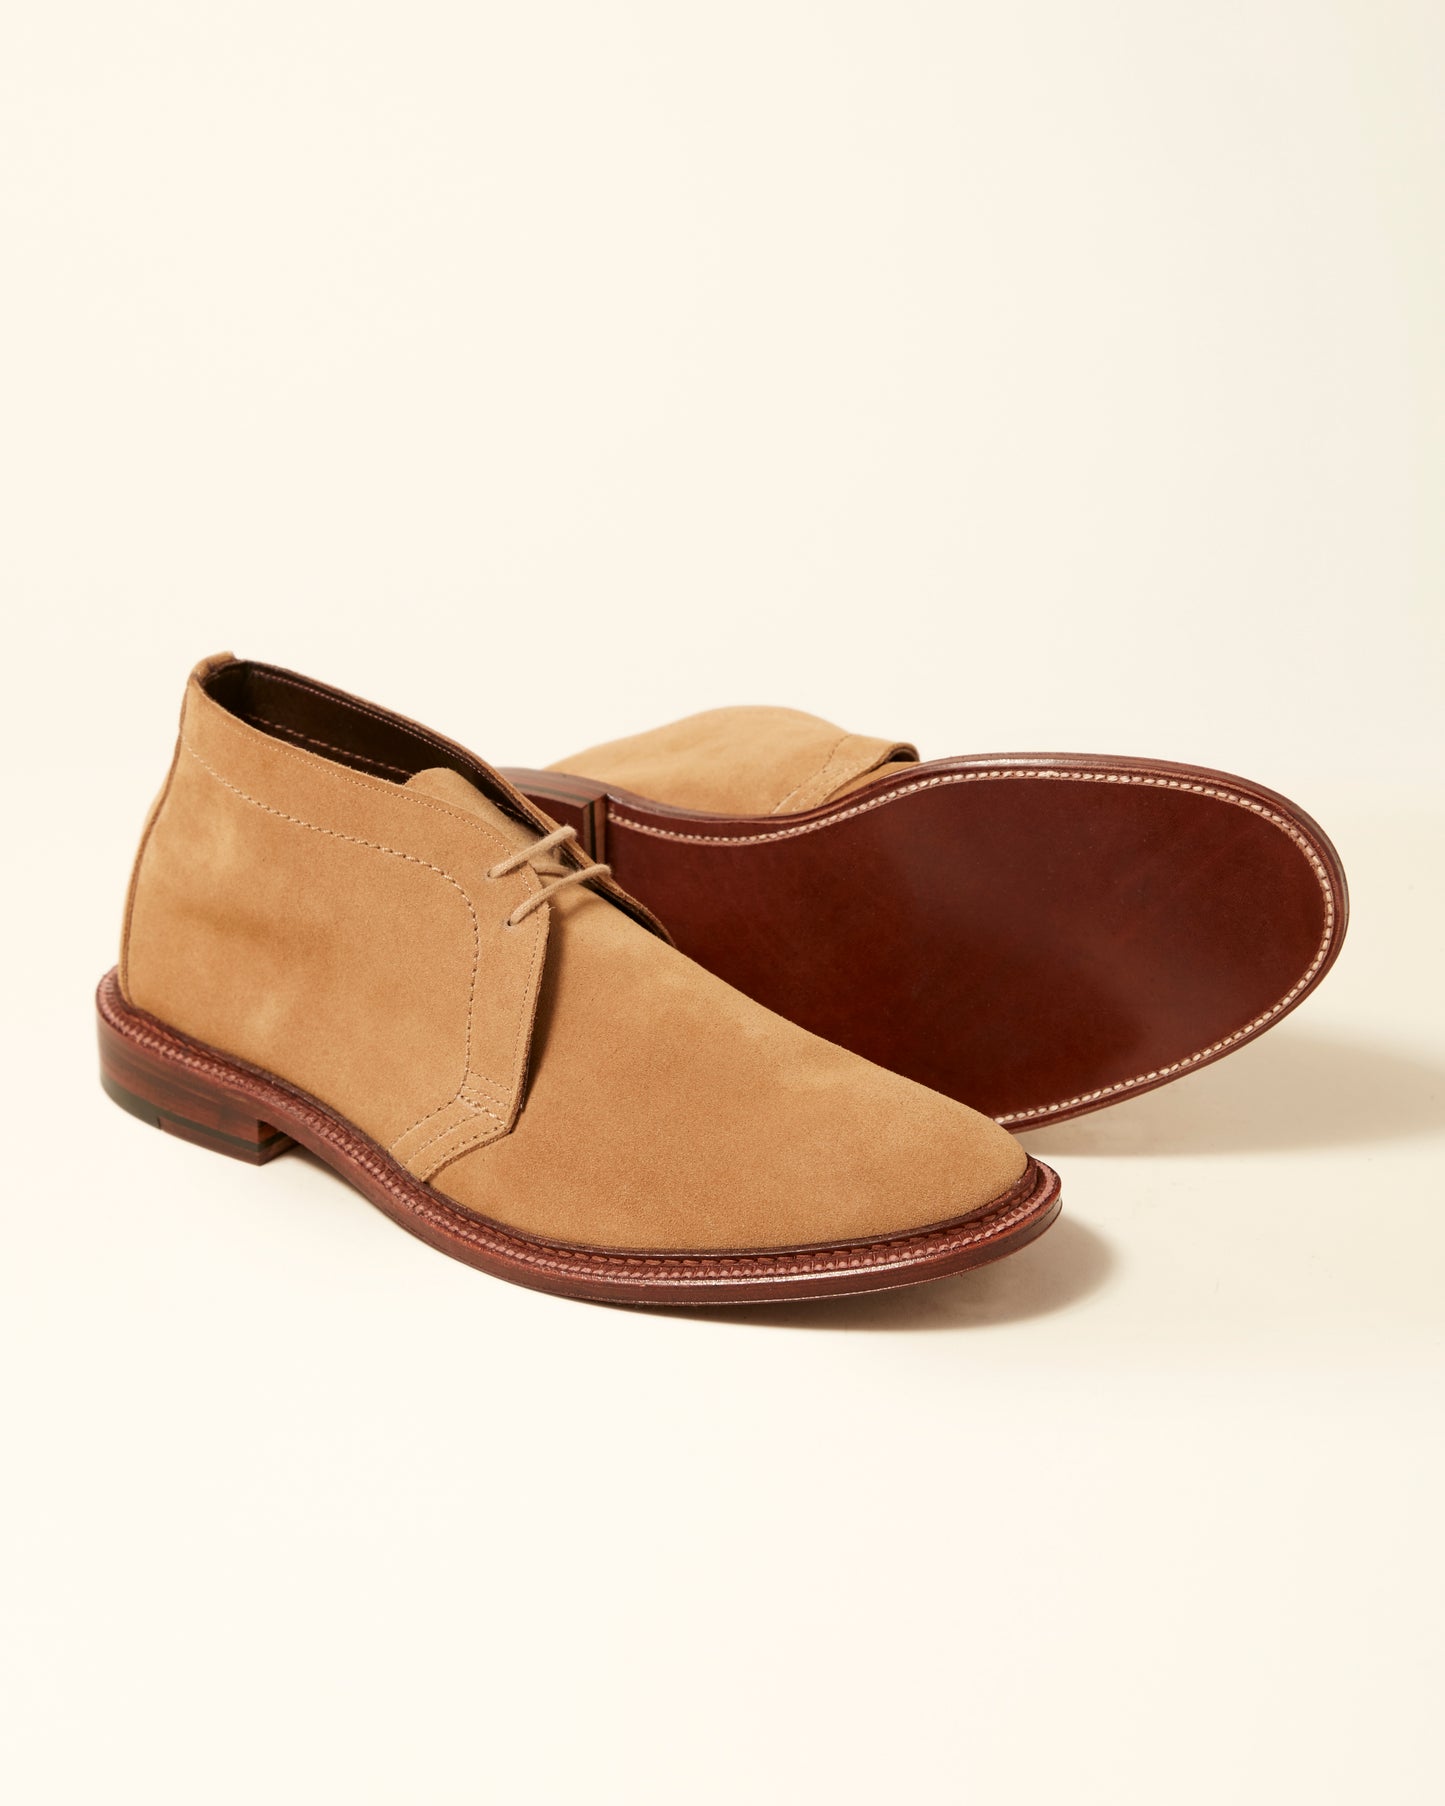 1494 Tan Suede Unlined Chukka Boot